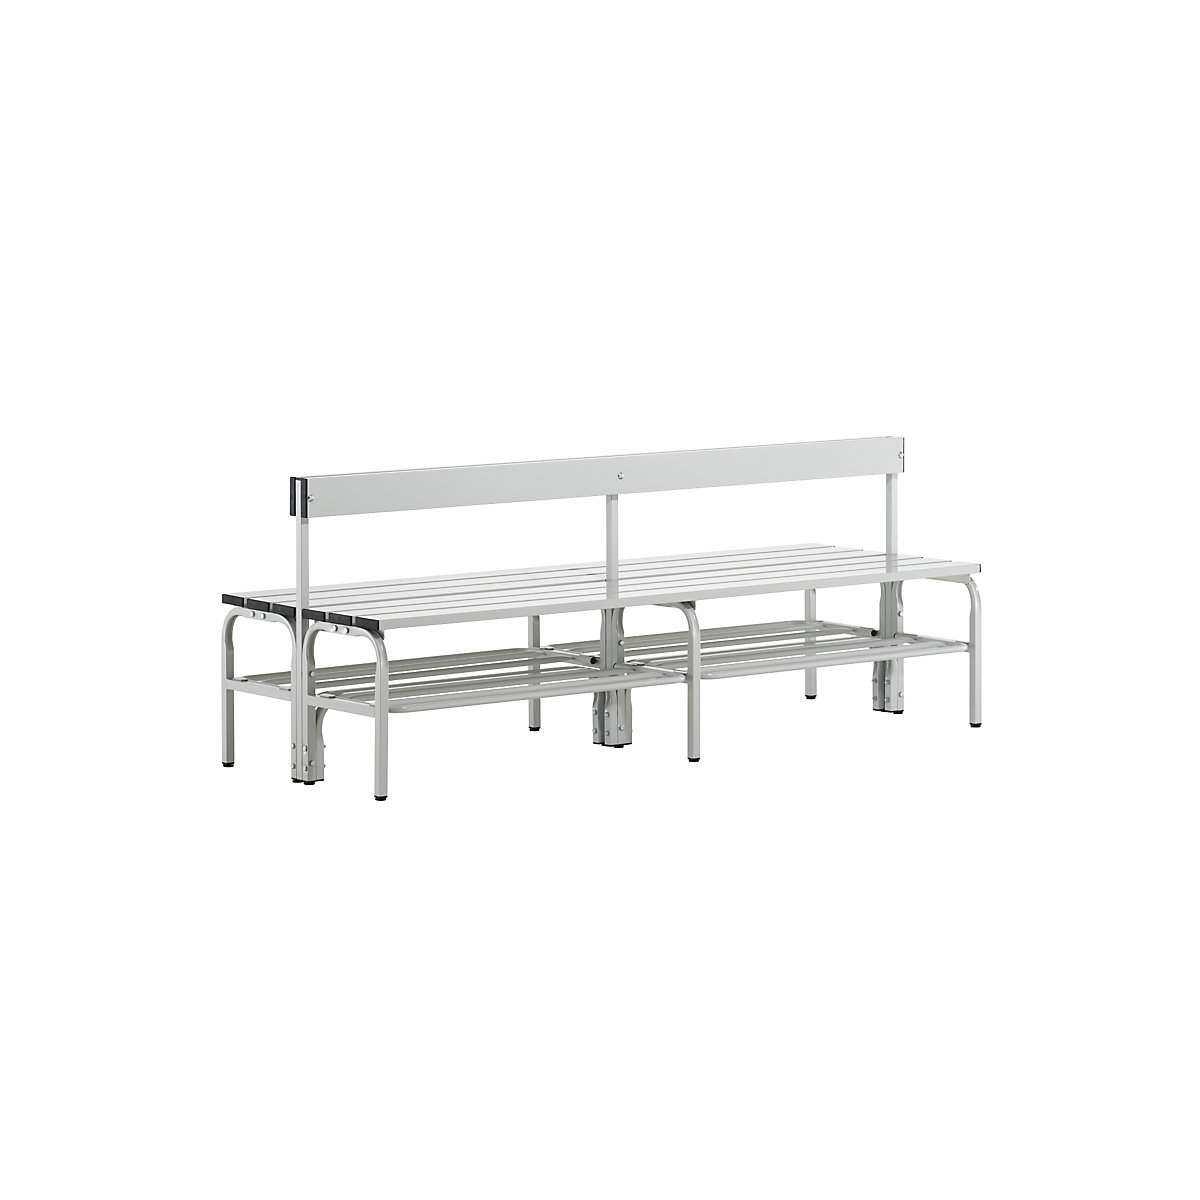 Sypro – Half height cloakroom bench with back rest, double sided, aluminium, length 2000 mm, light grey, shoe rack